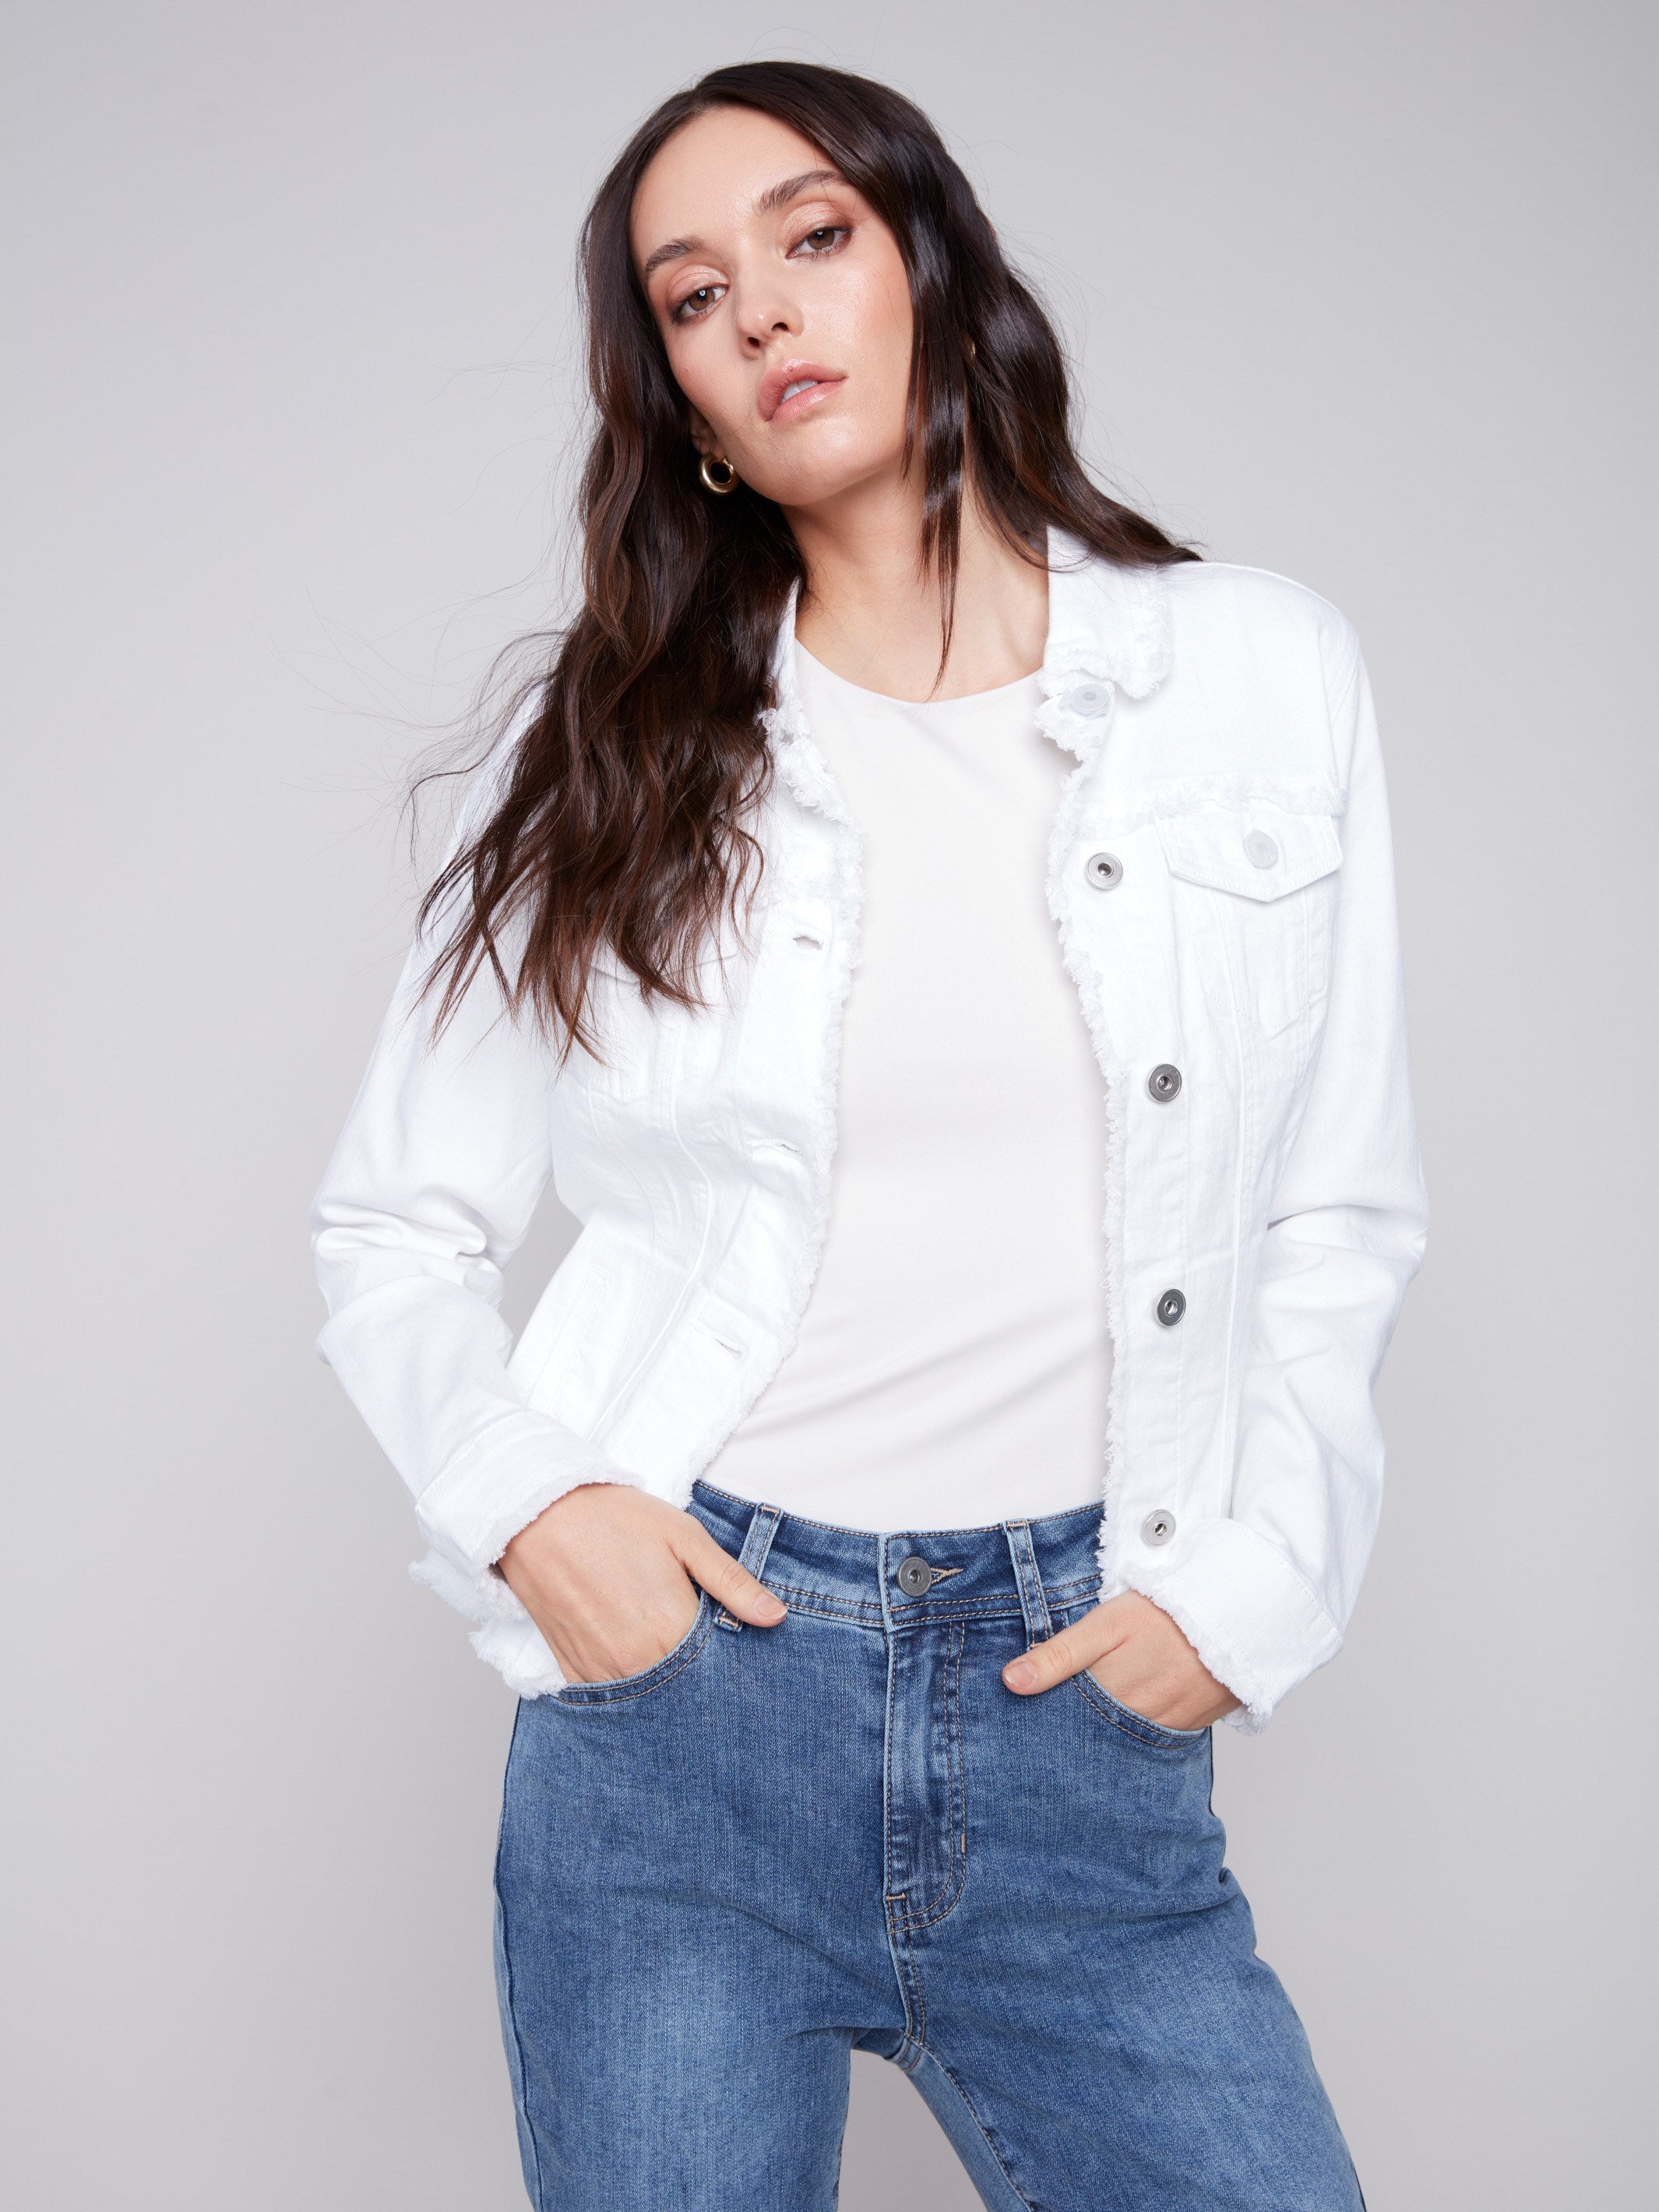 Twill Jean Jacket with Frayed Edges - White - Charlie B Collection Canada - Image 1